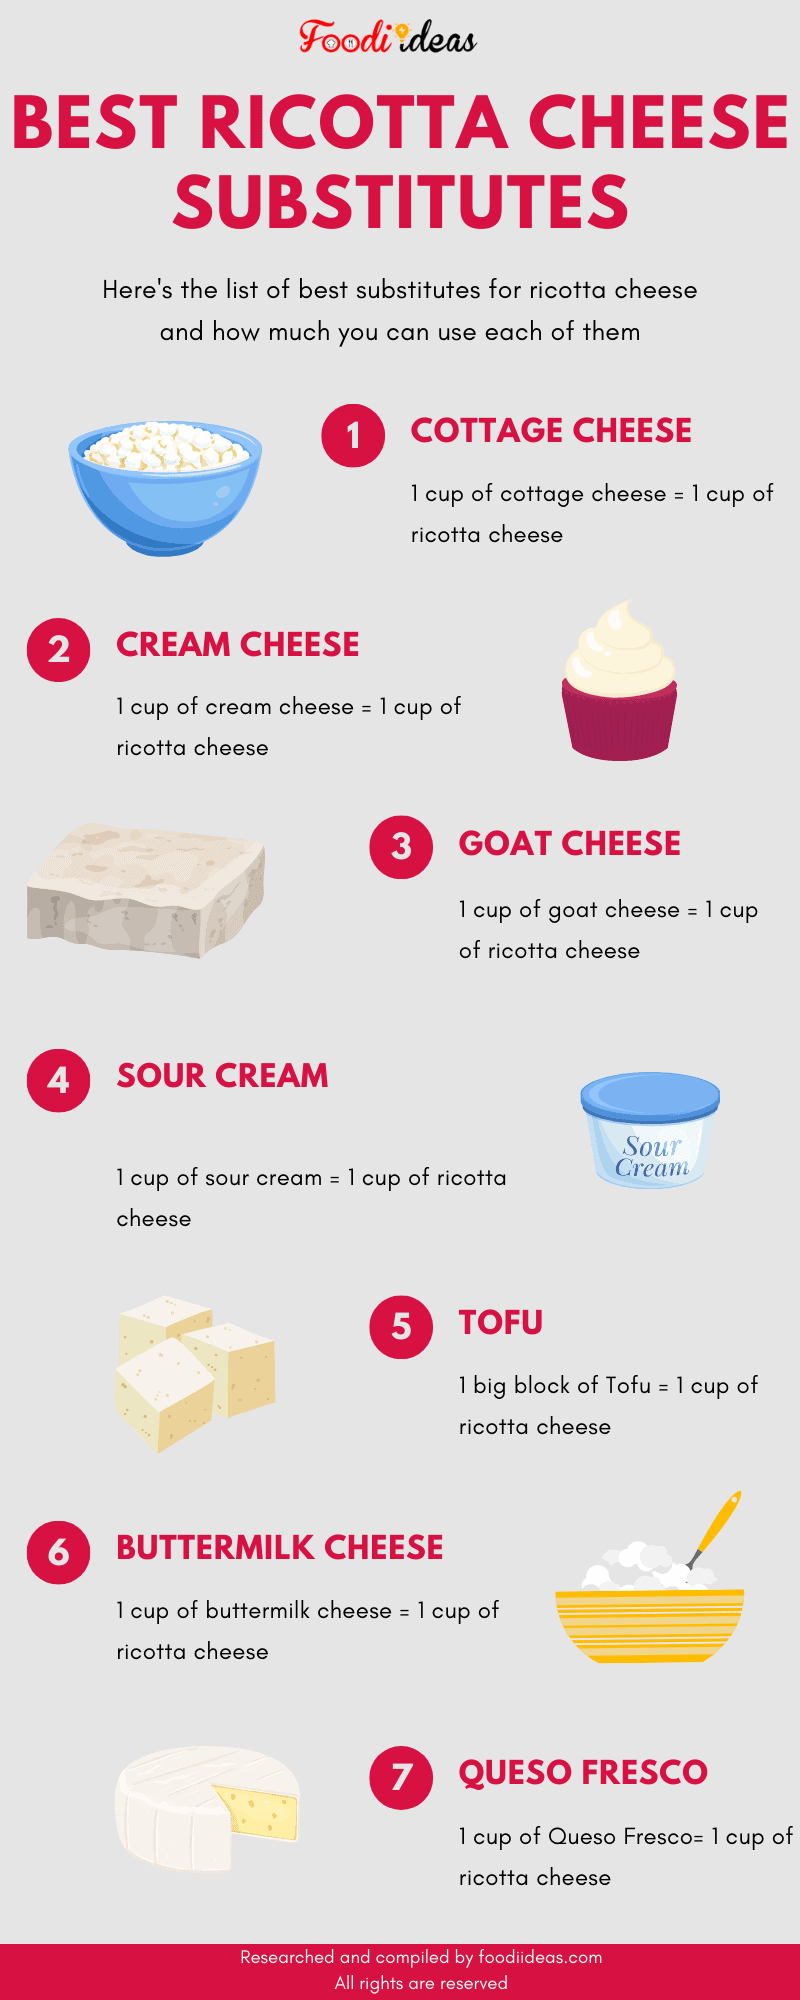 best substitutes for ricotta cheese and their substitution amount